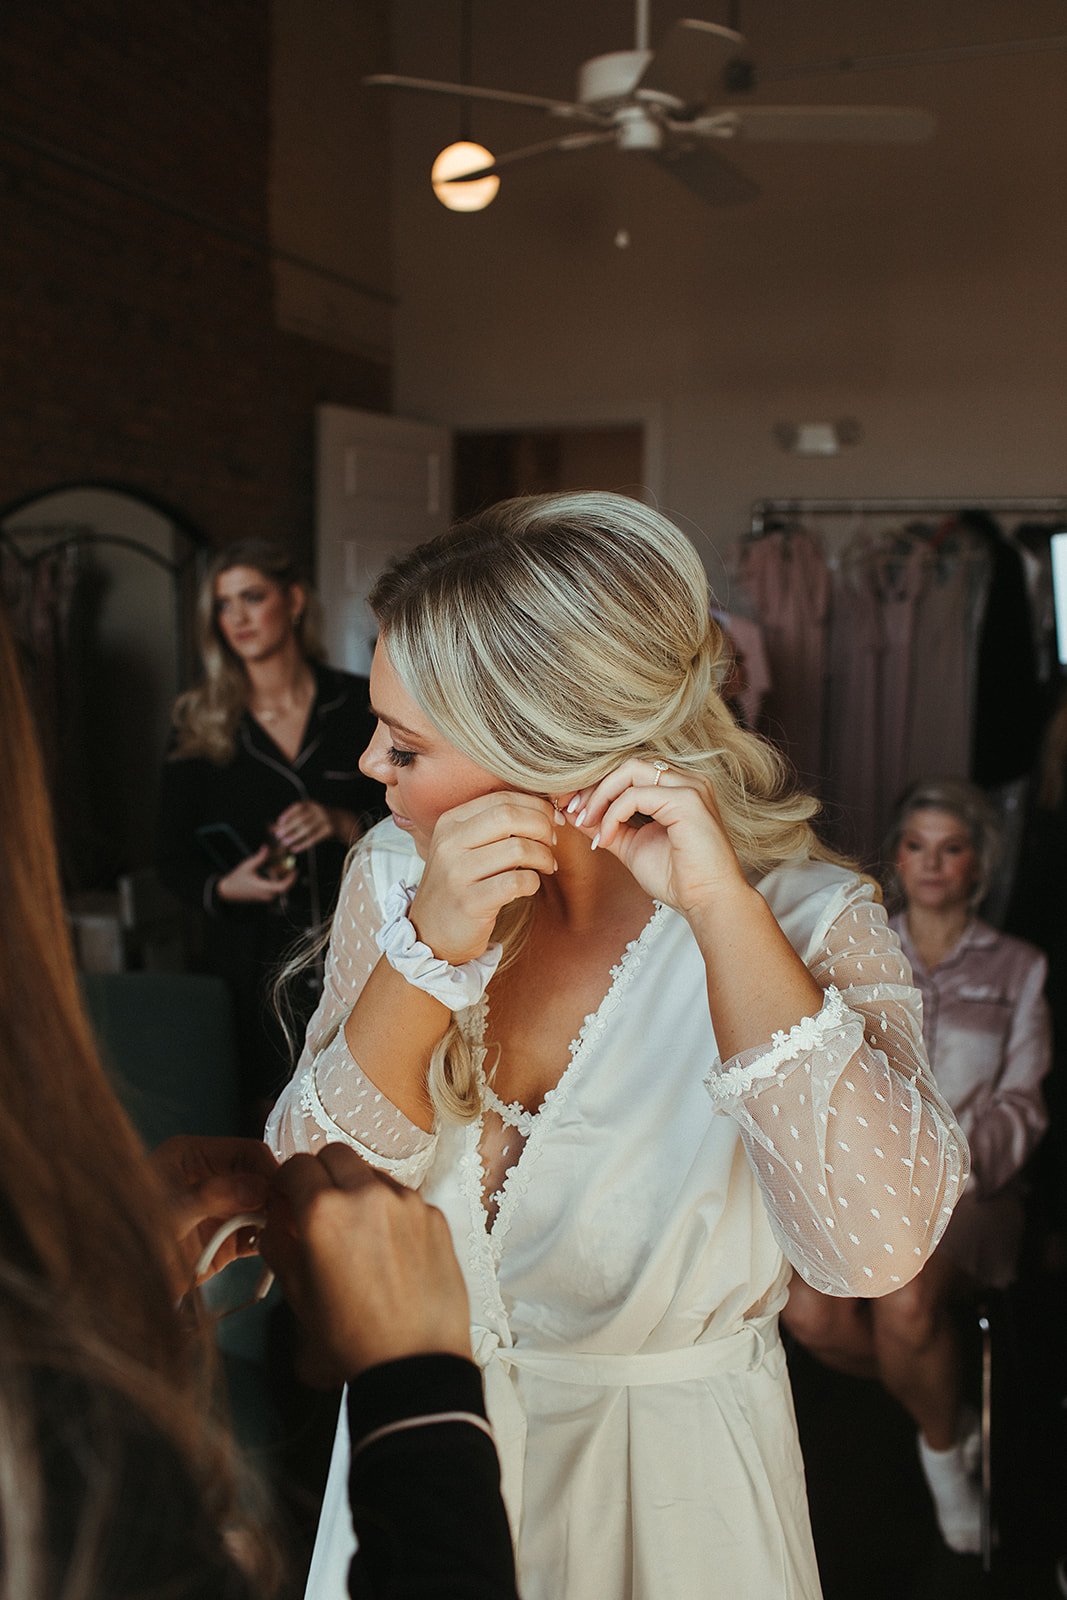  A bride wearing a white silk lace robe getting ready on their wedding day surrounded by bridemaids. 